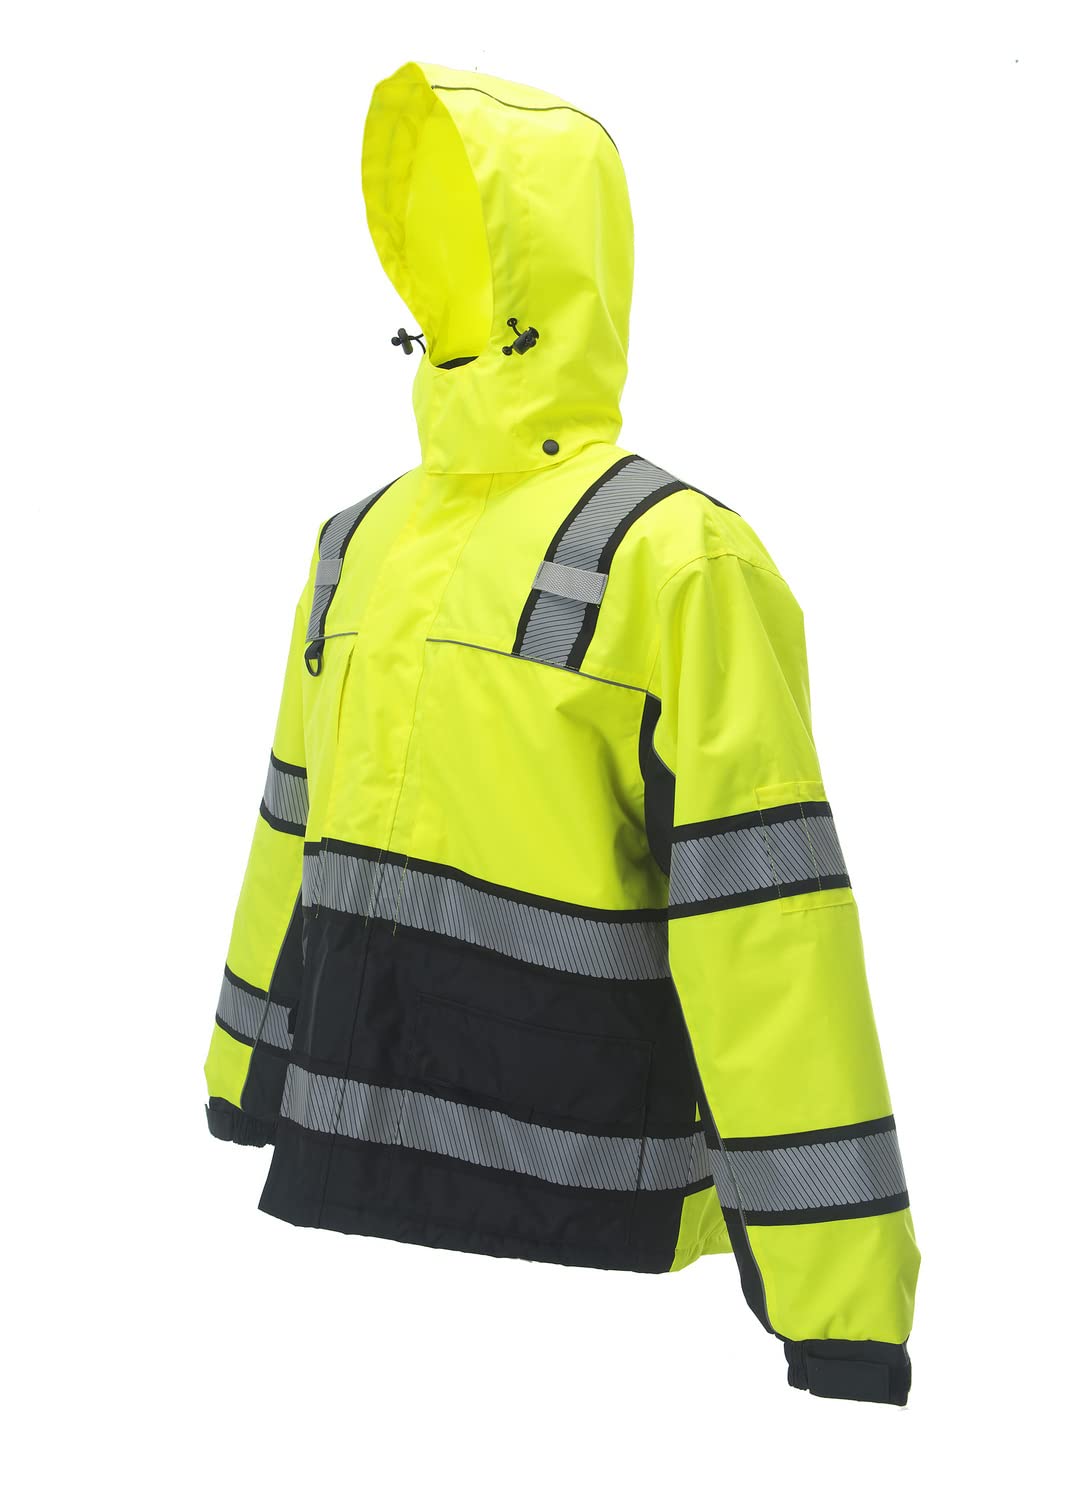 High-Visibility Parka, Type R, Class 3